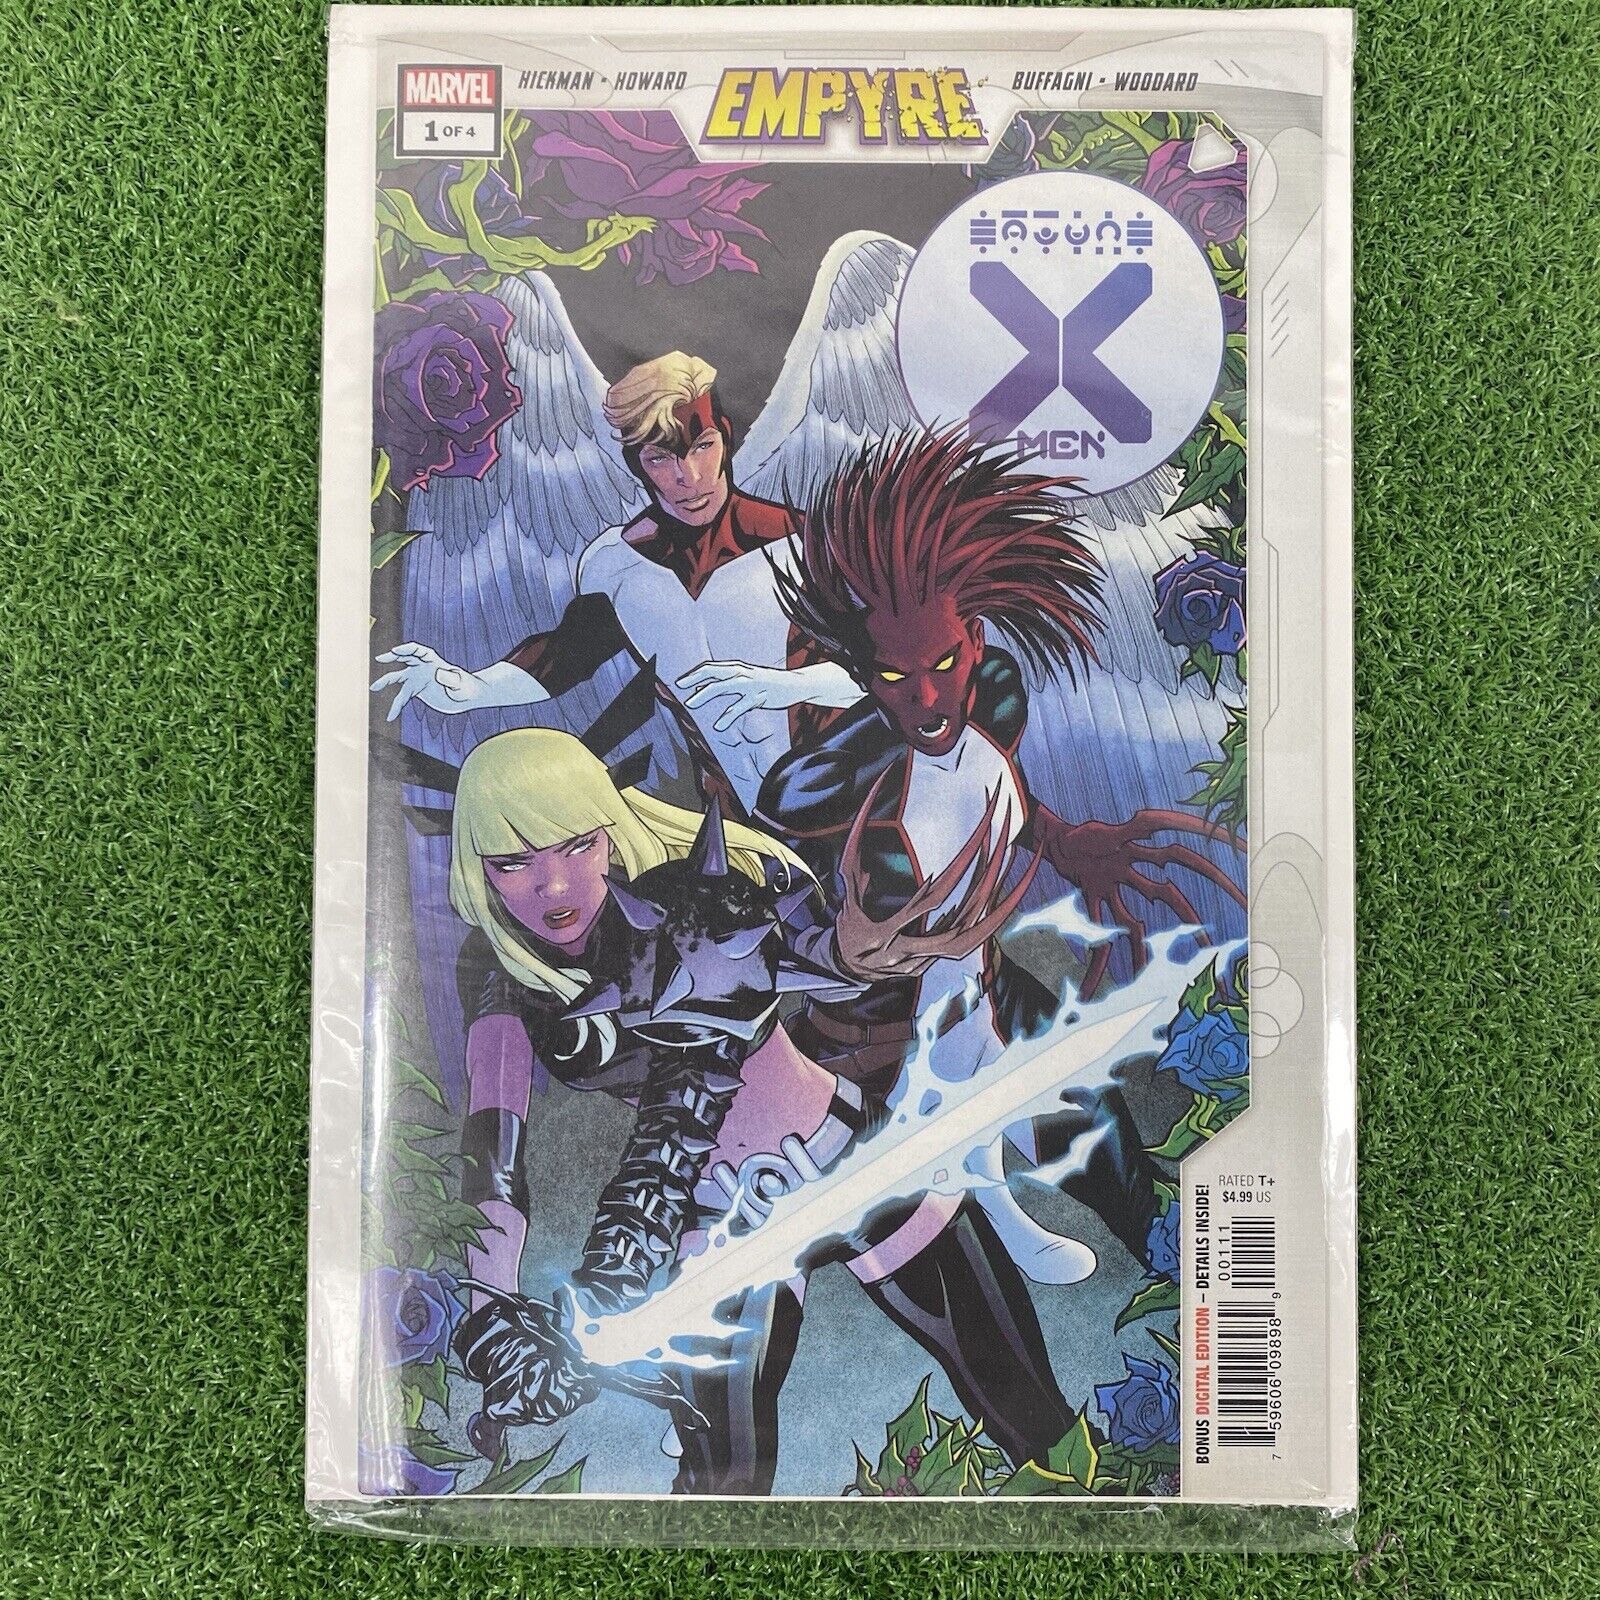 Empyre X-Men by Jonathan Hickman Volume Issue #1 of 4 Marvel Comics